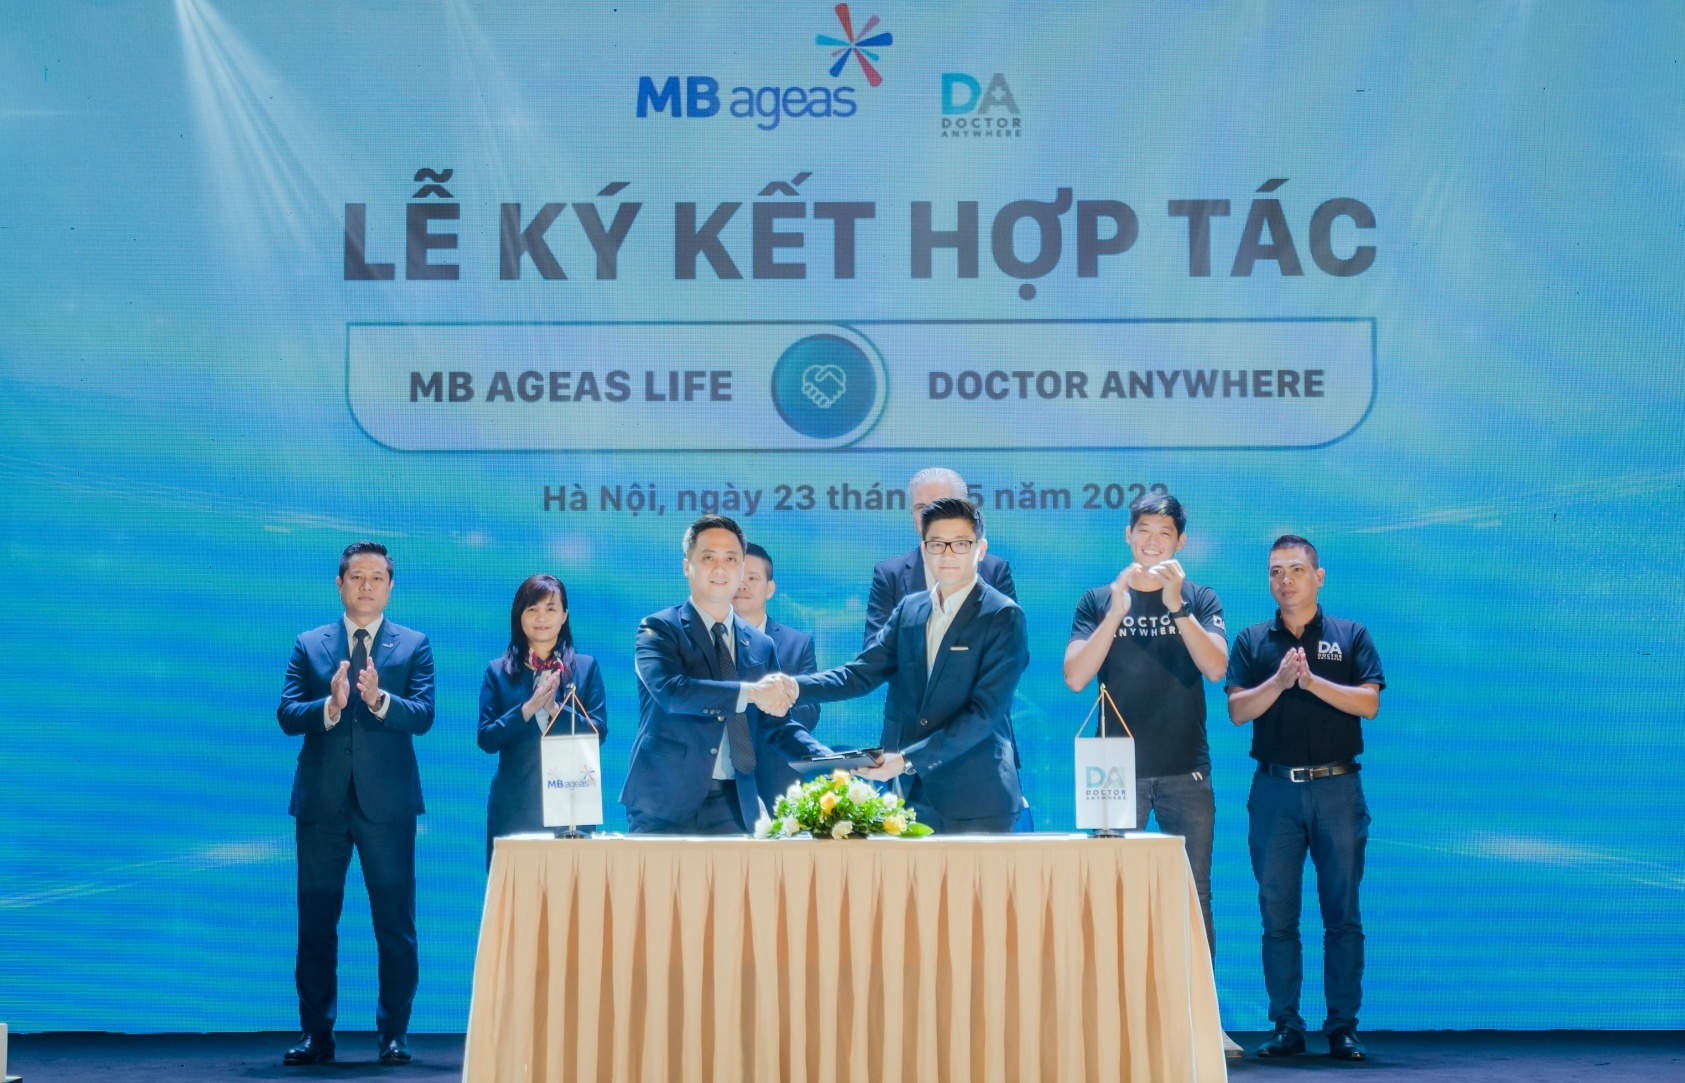 Doctor Anywhere and MB Ageas Life strengthen partnership